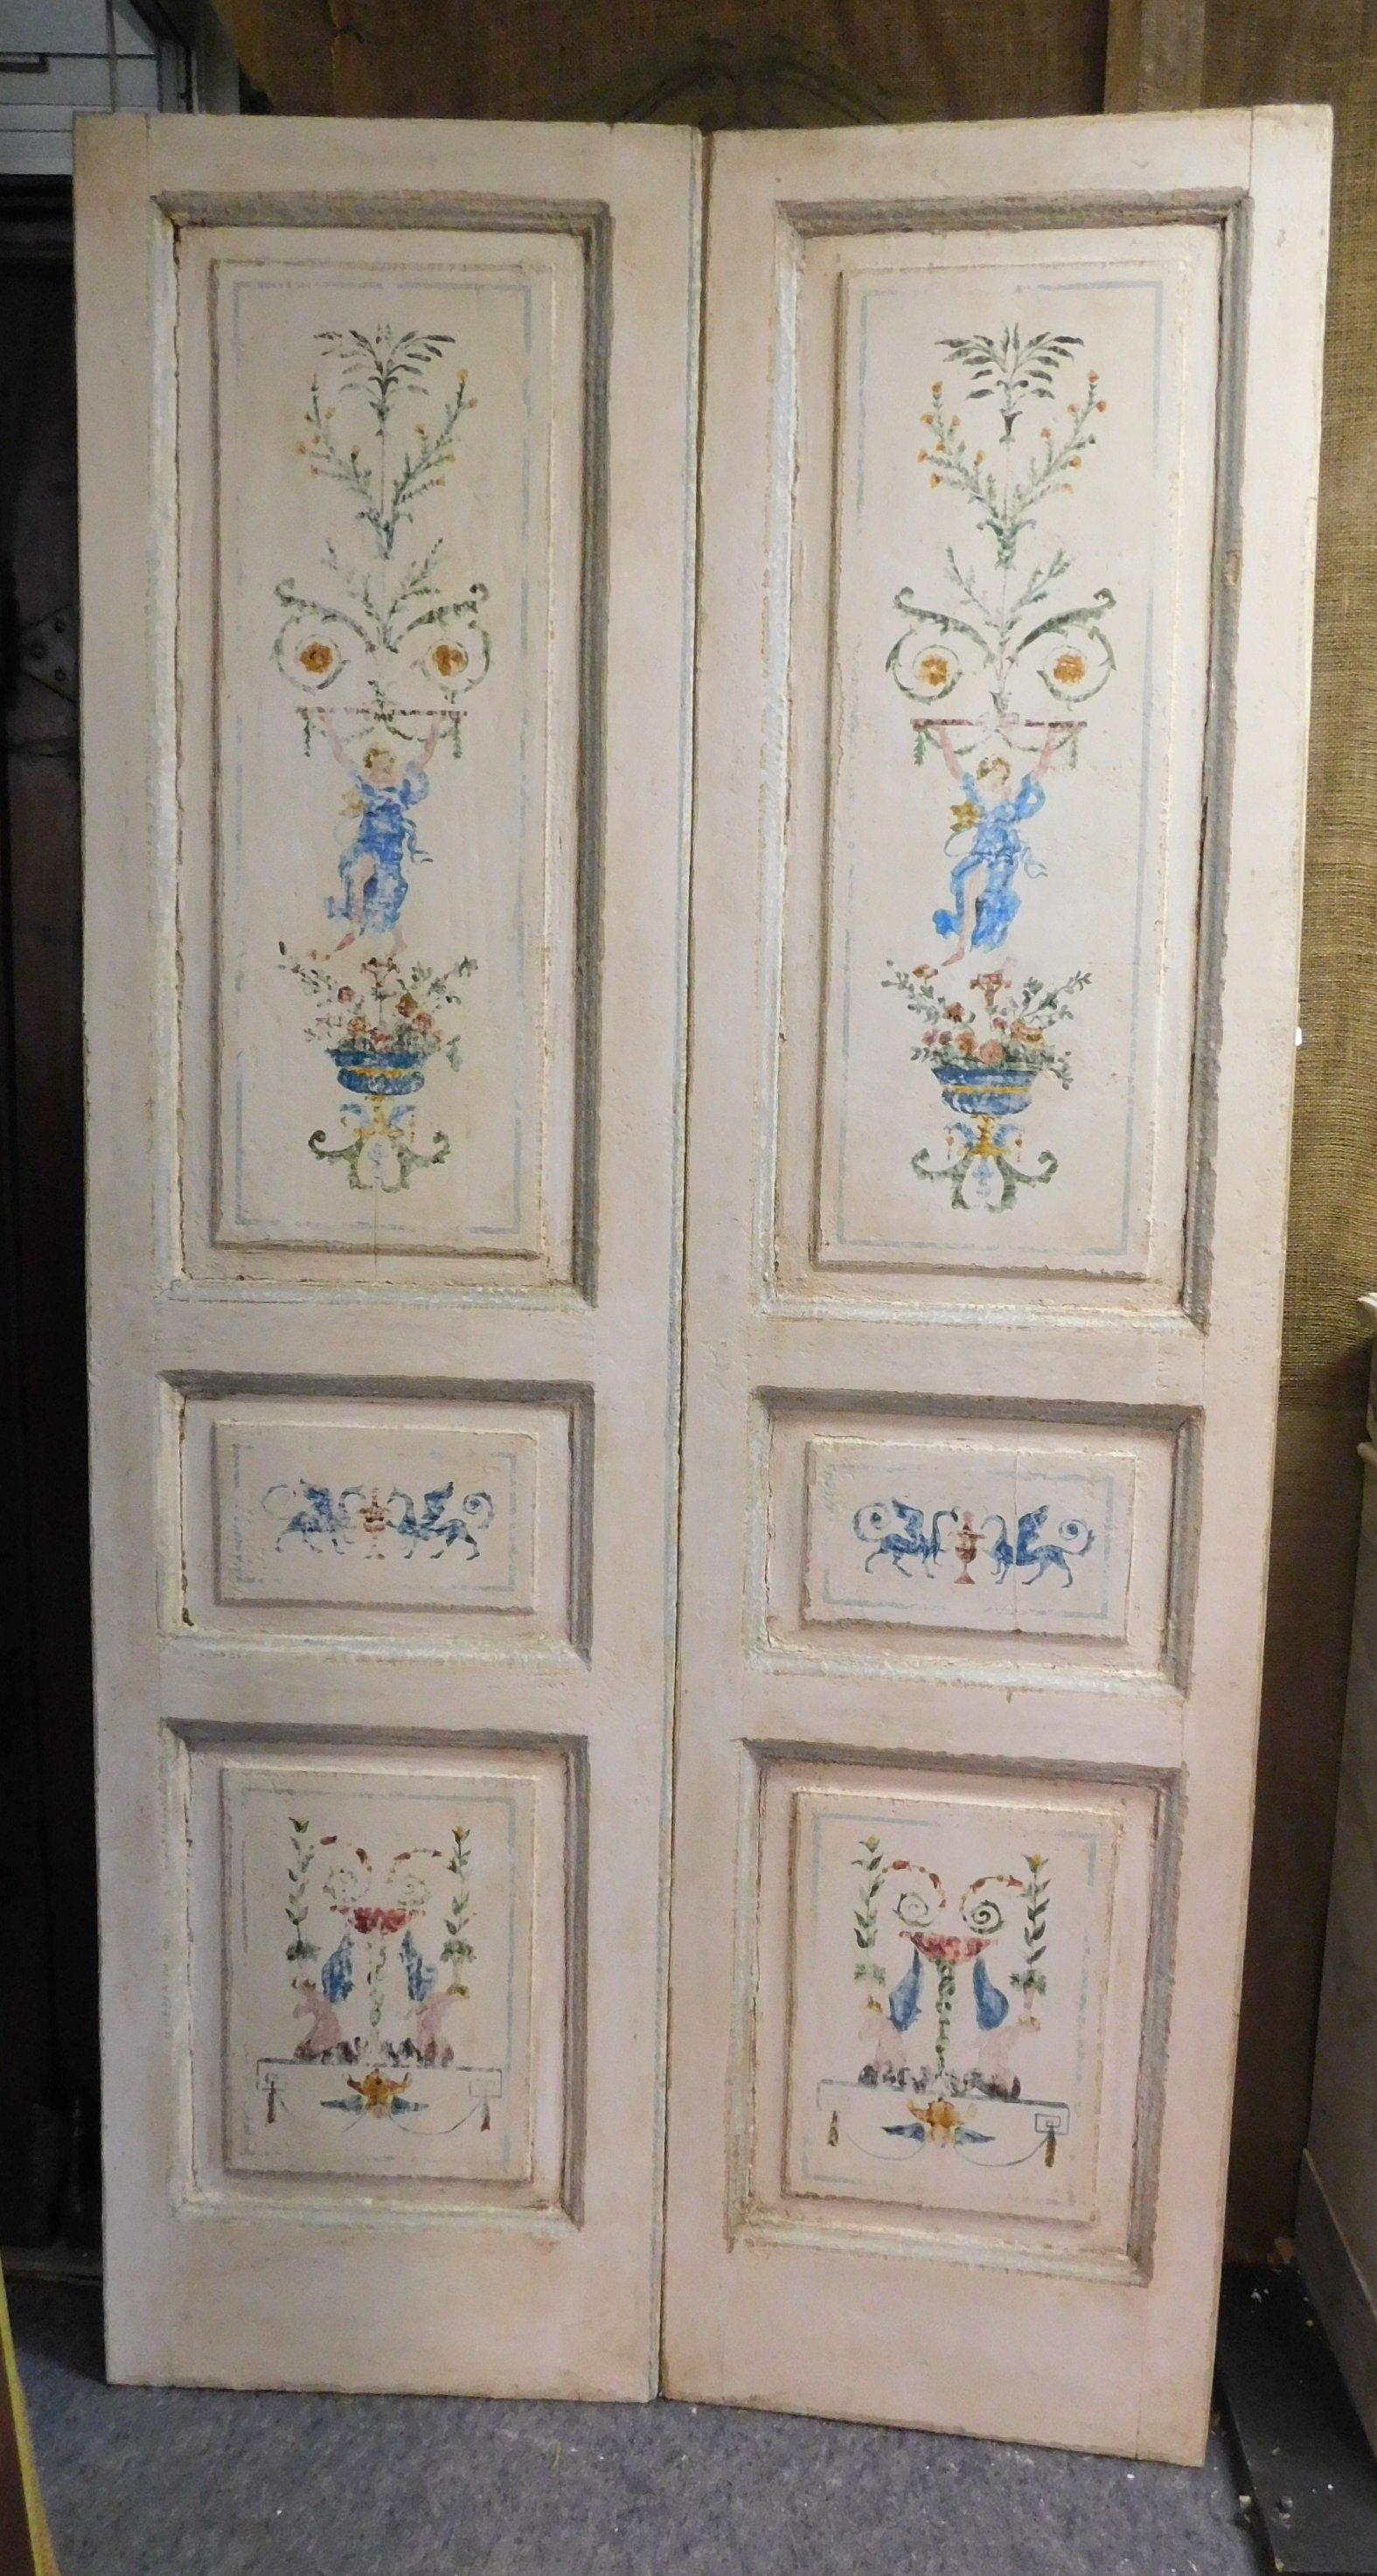 N.2 ancient double-wing doors, white background and hand painted with colored allegories, typical design of the time, built in the late '700, coming from Umbria (Italy).
They are sold without a frame, but they look beautiful on both sides, so you